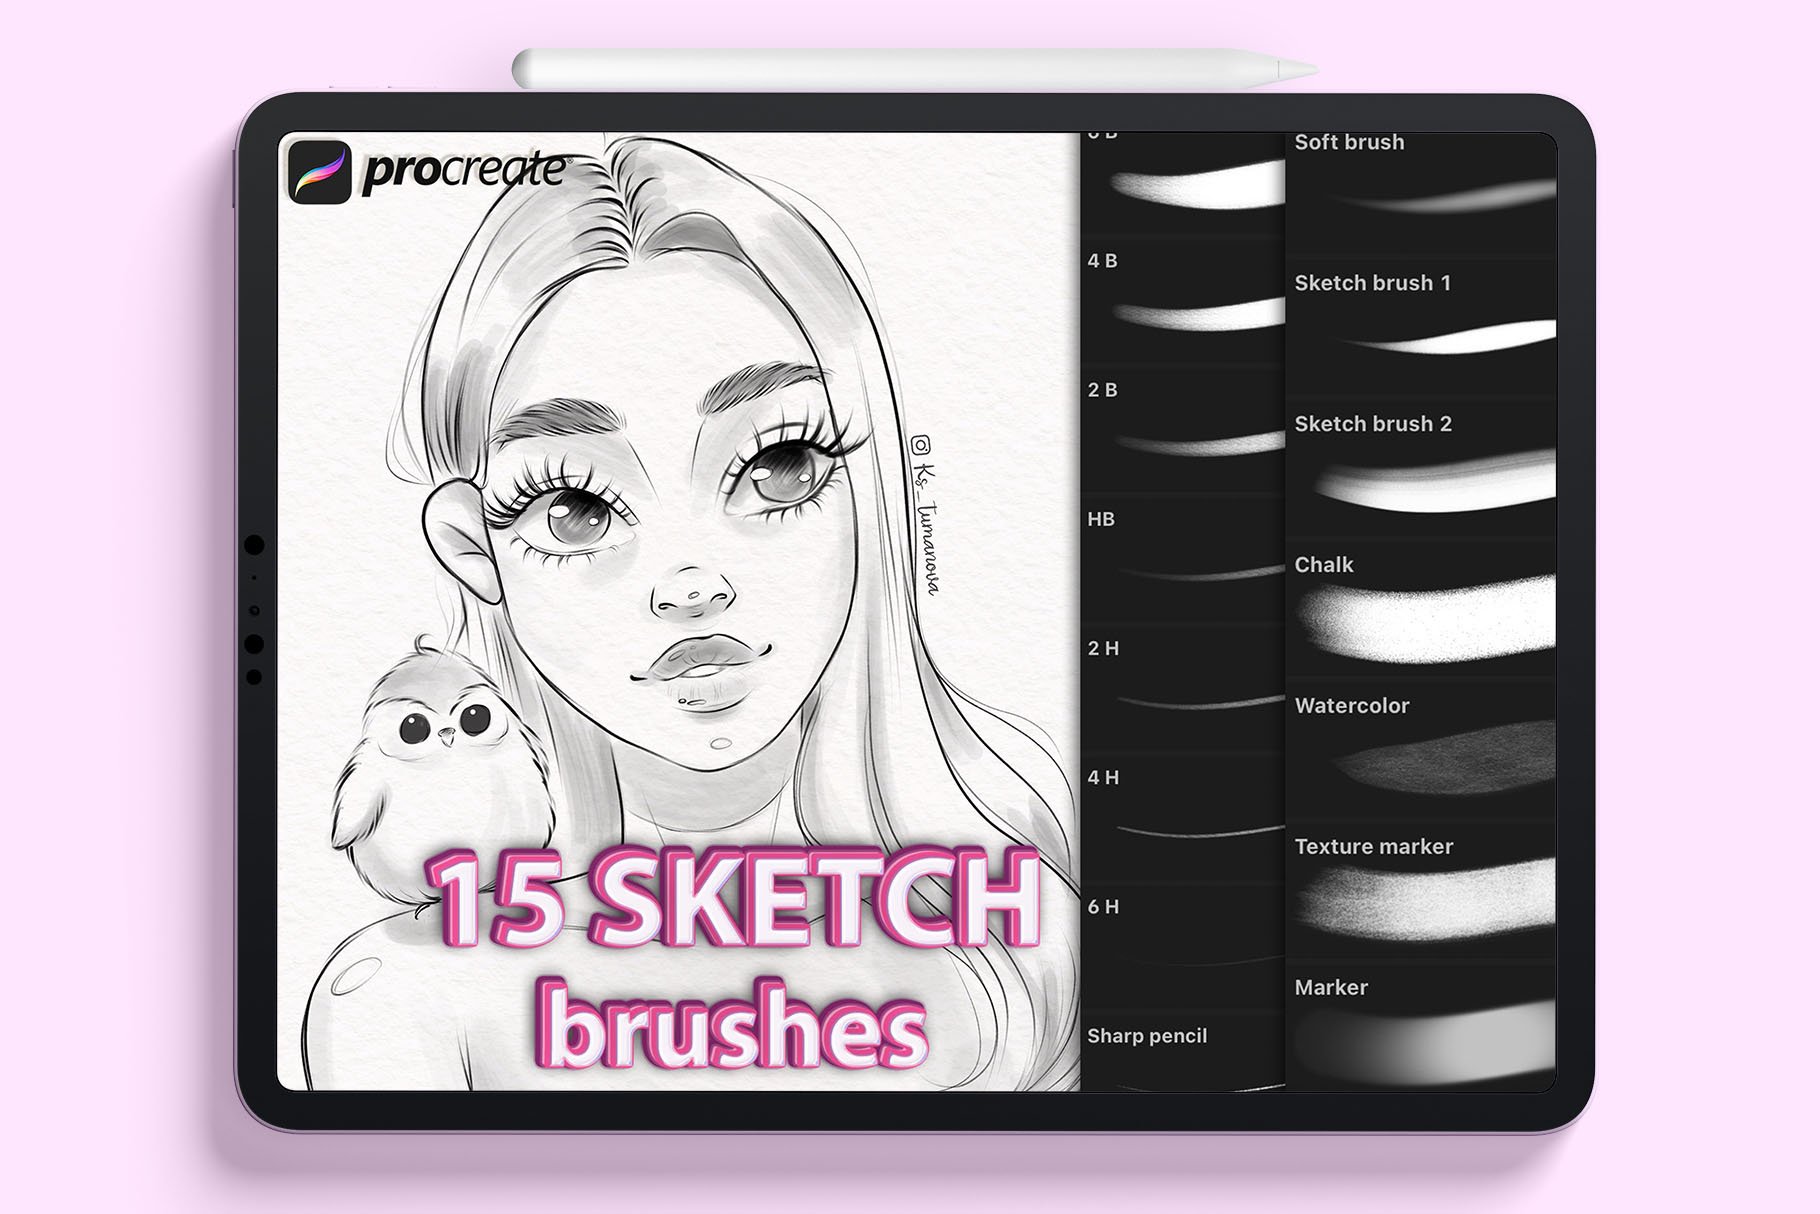 Procreate pencil sketch brushes cover image.